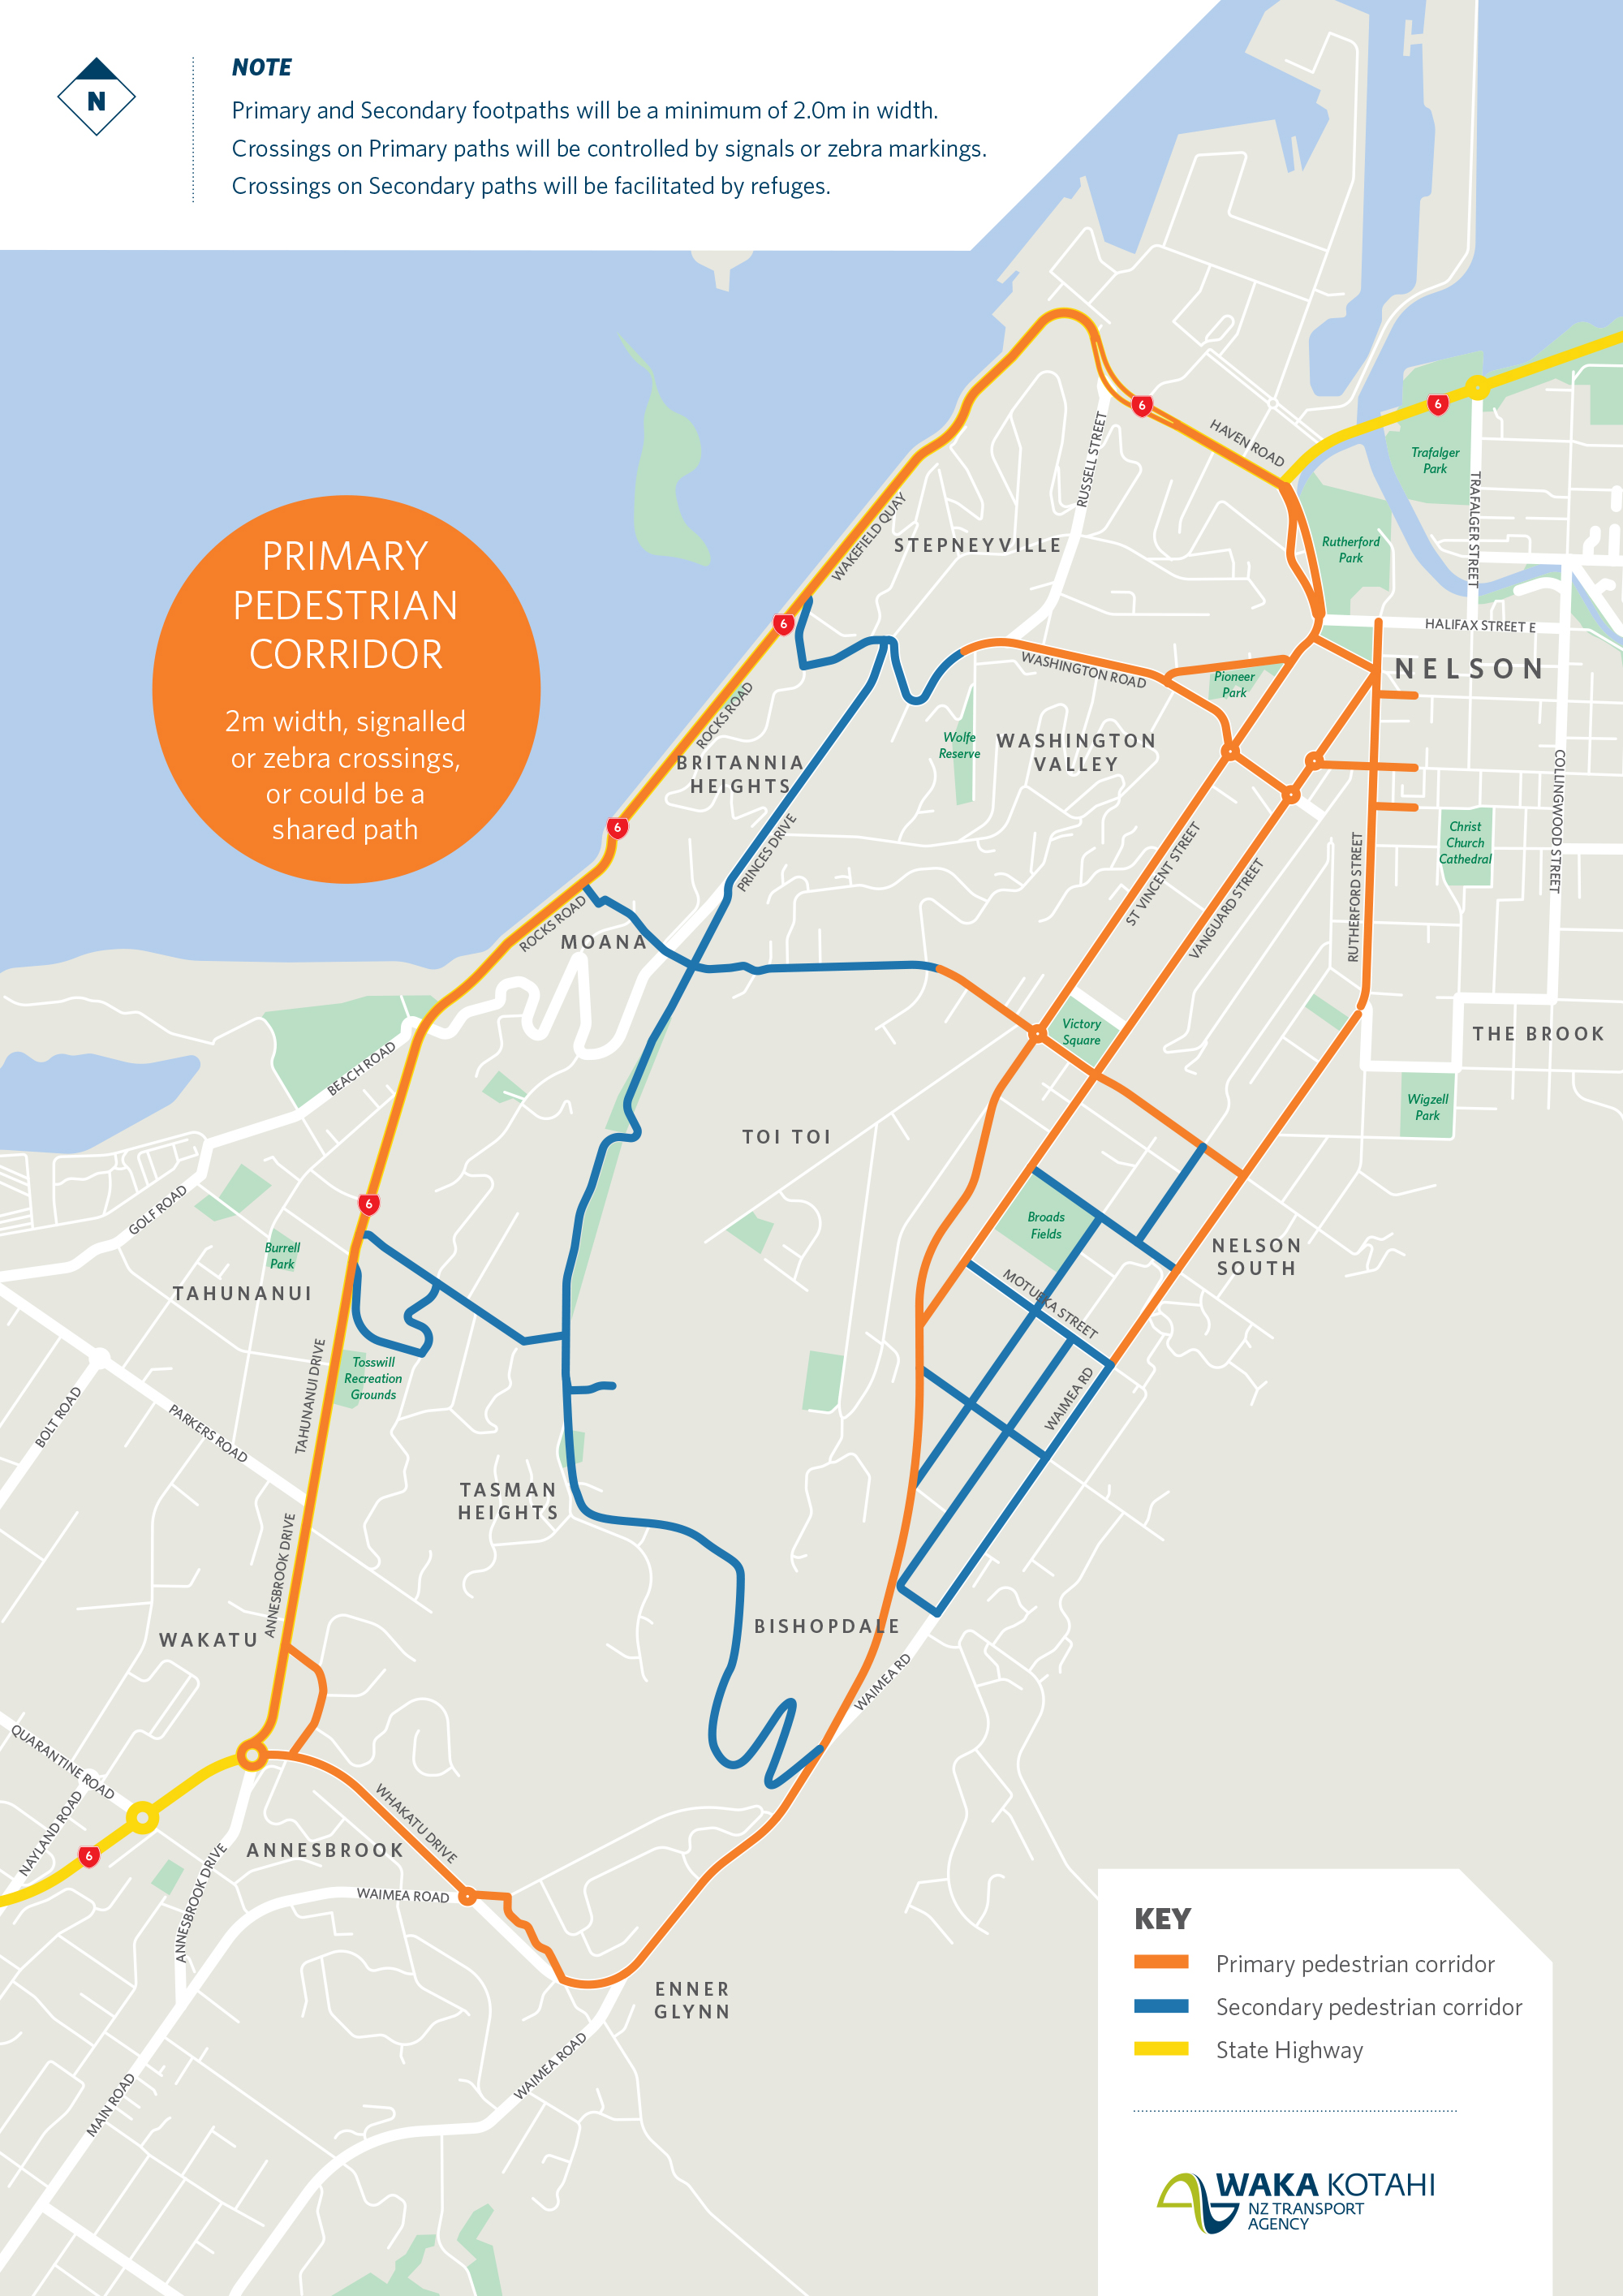 Short-term options package map showing a first draft of walking and cycling connections